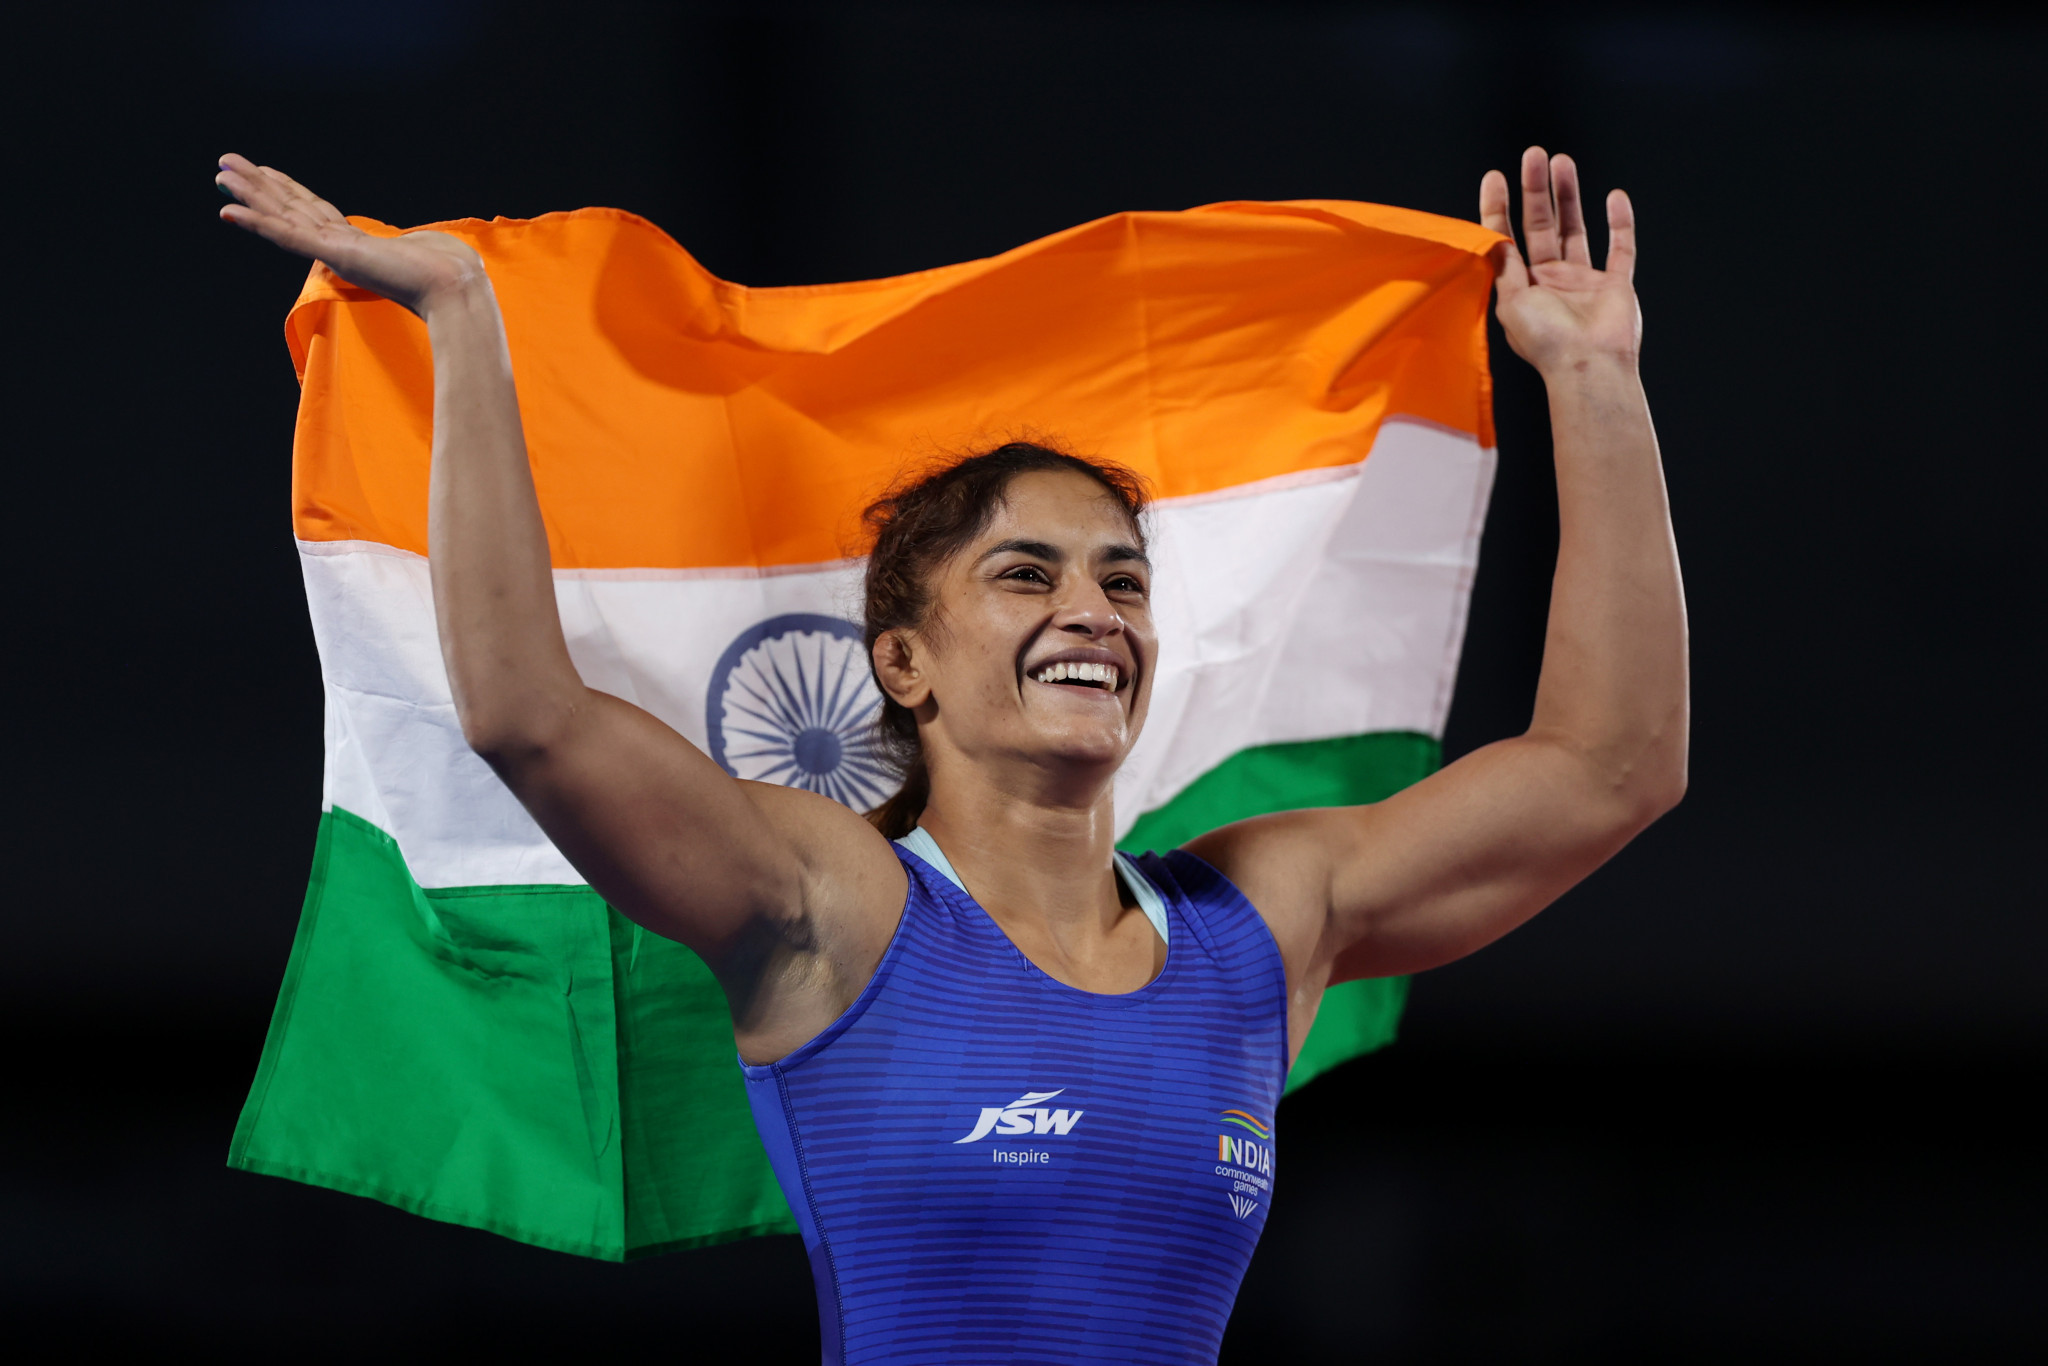 Vinesh Phogat is one of India's best wrestlers on the current national team and won an Asian Games gold medal at Jakarta Palembang 2018 ©Getty Images